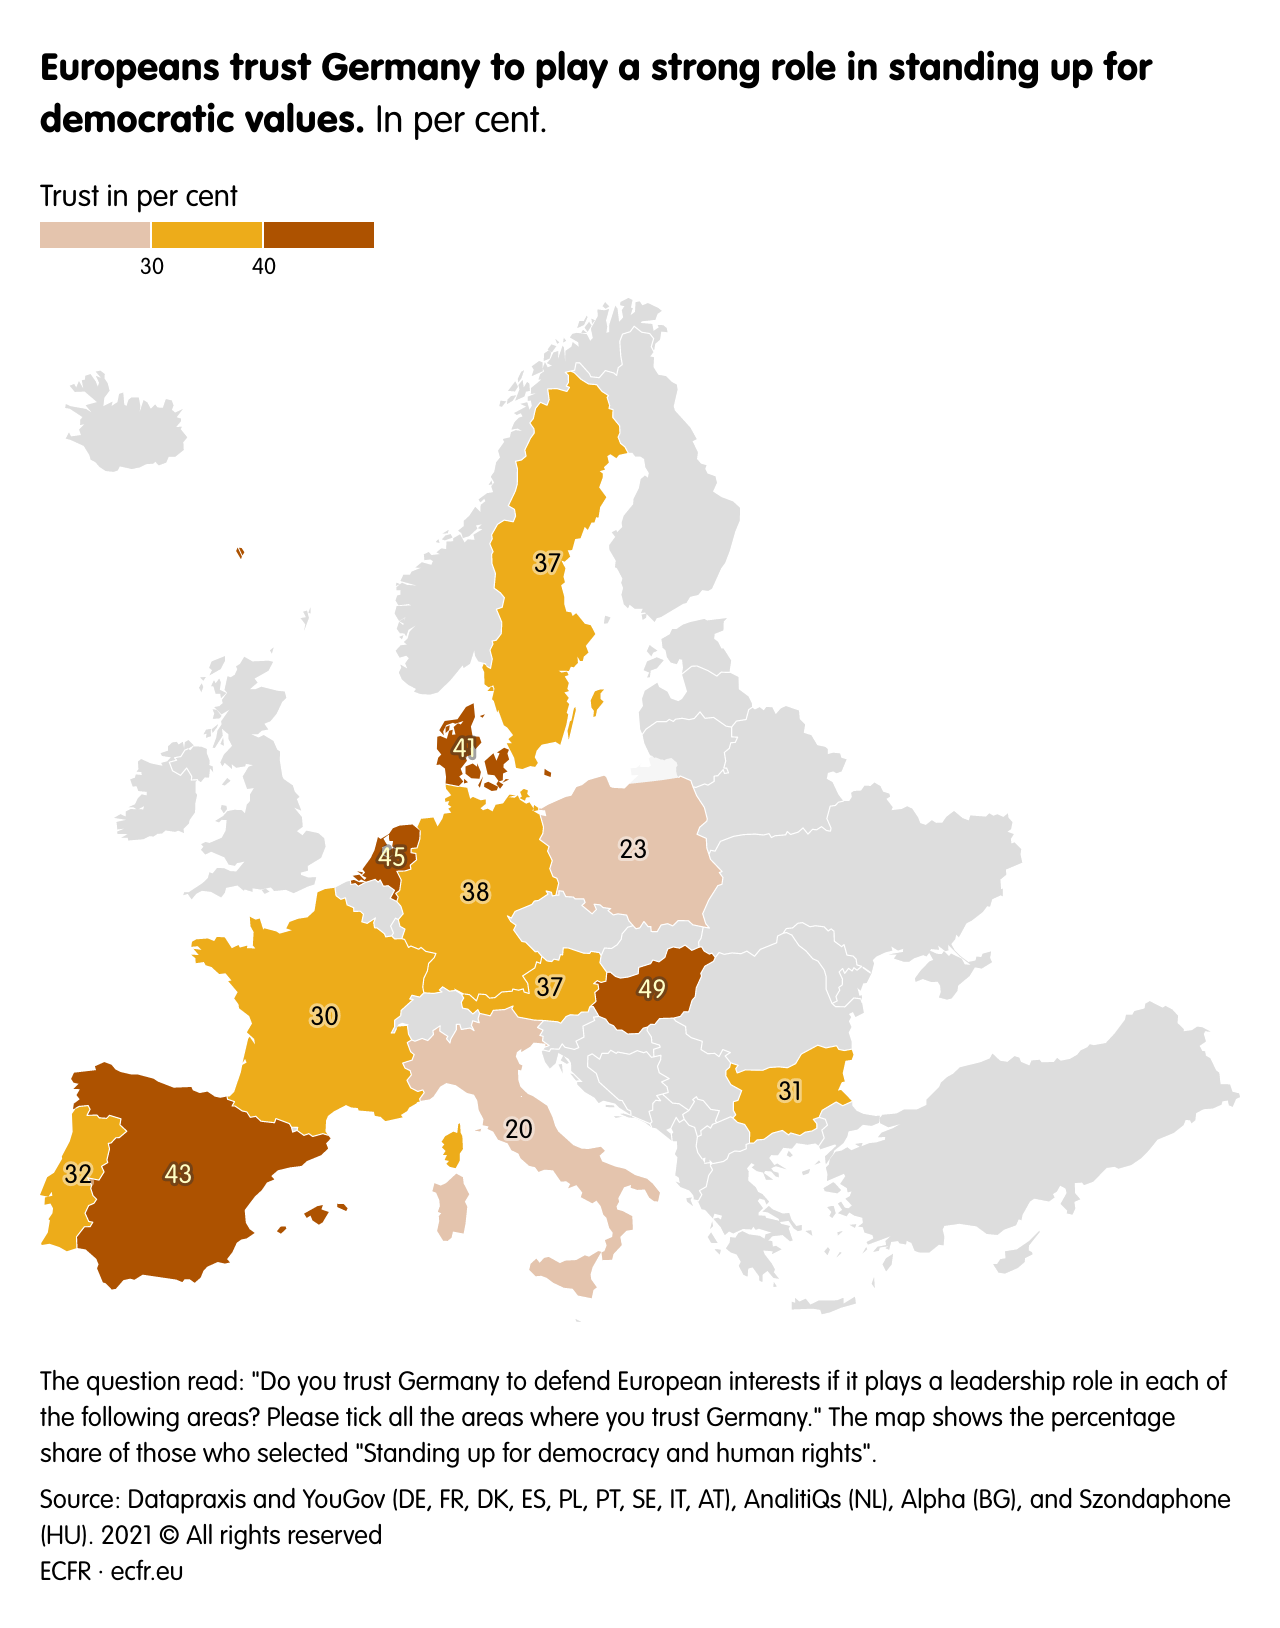 Europeans trust Germany to play a strong role in standing up for democratic values.